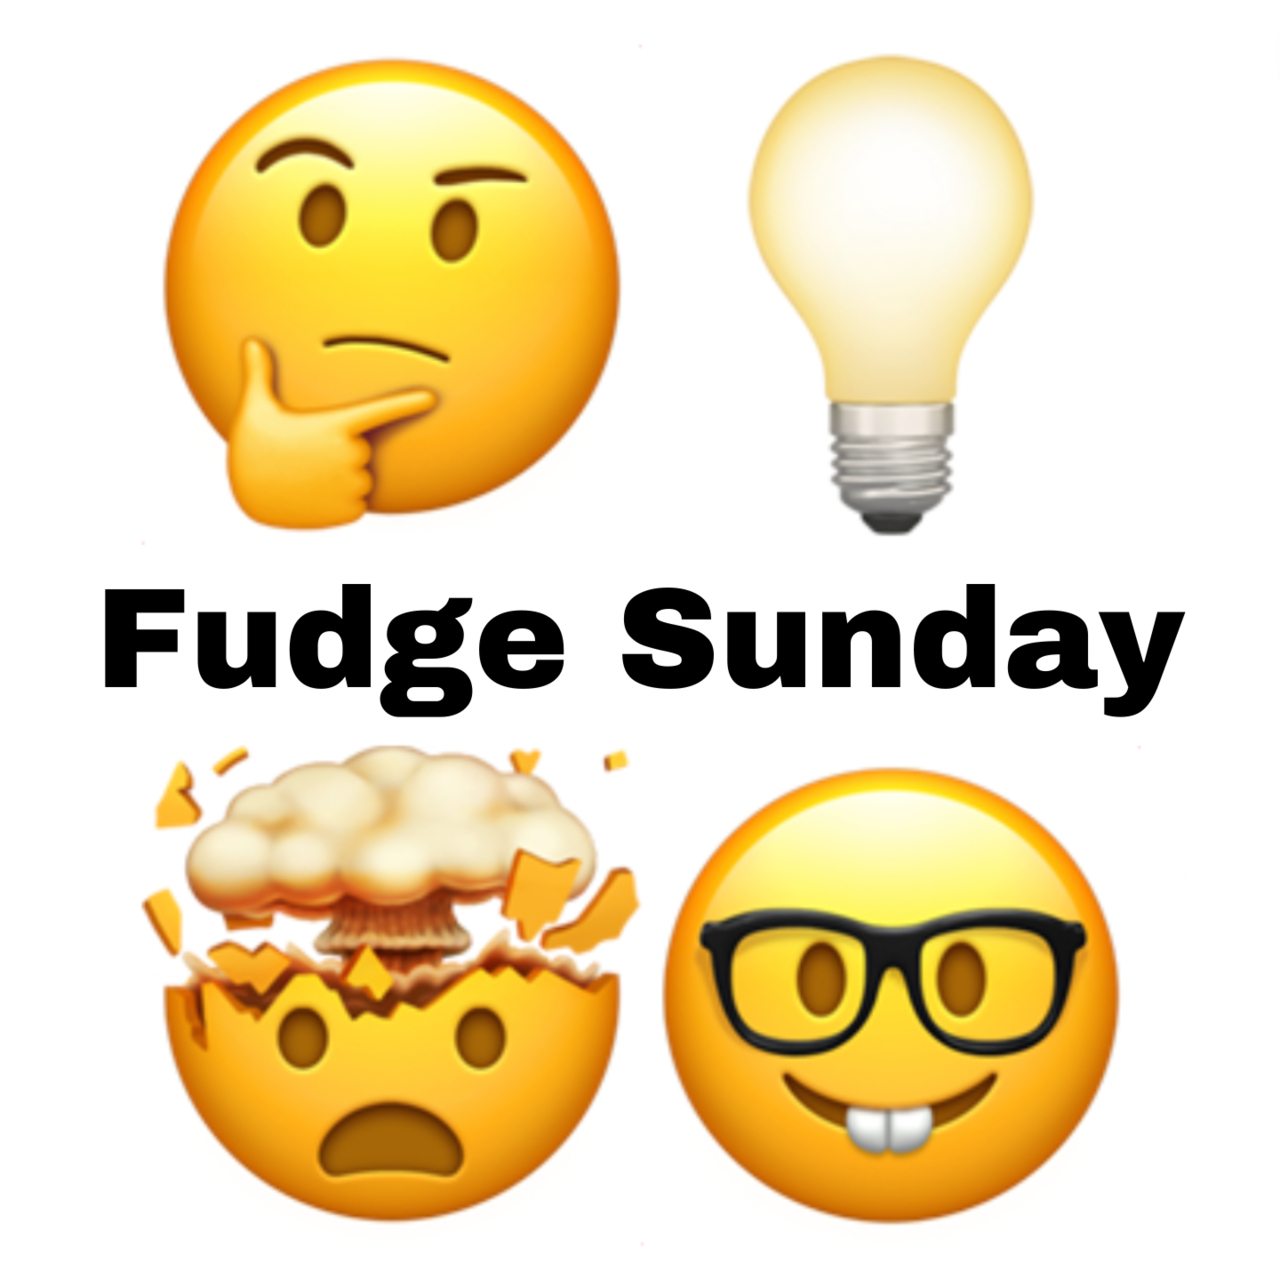 Fudge Sunday is moving to fudge.org on Buttondown